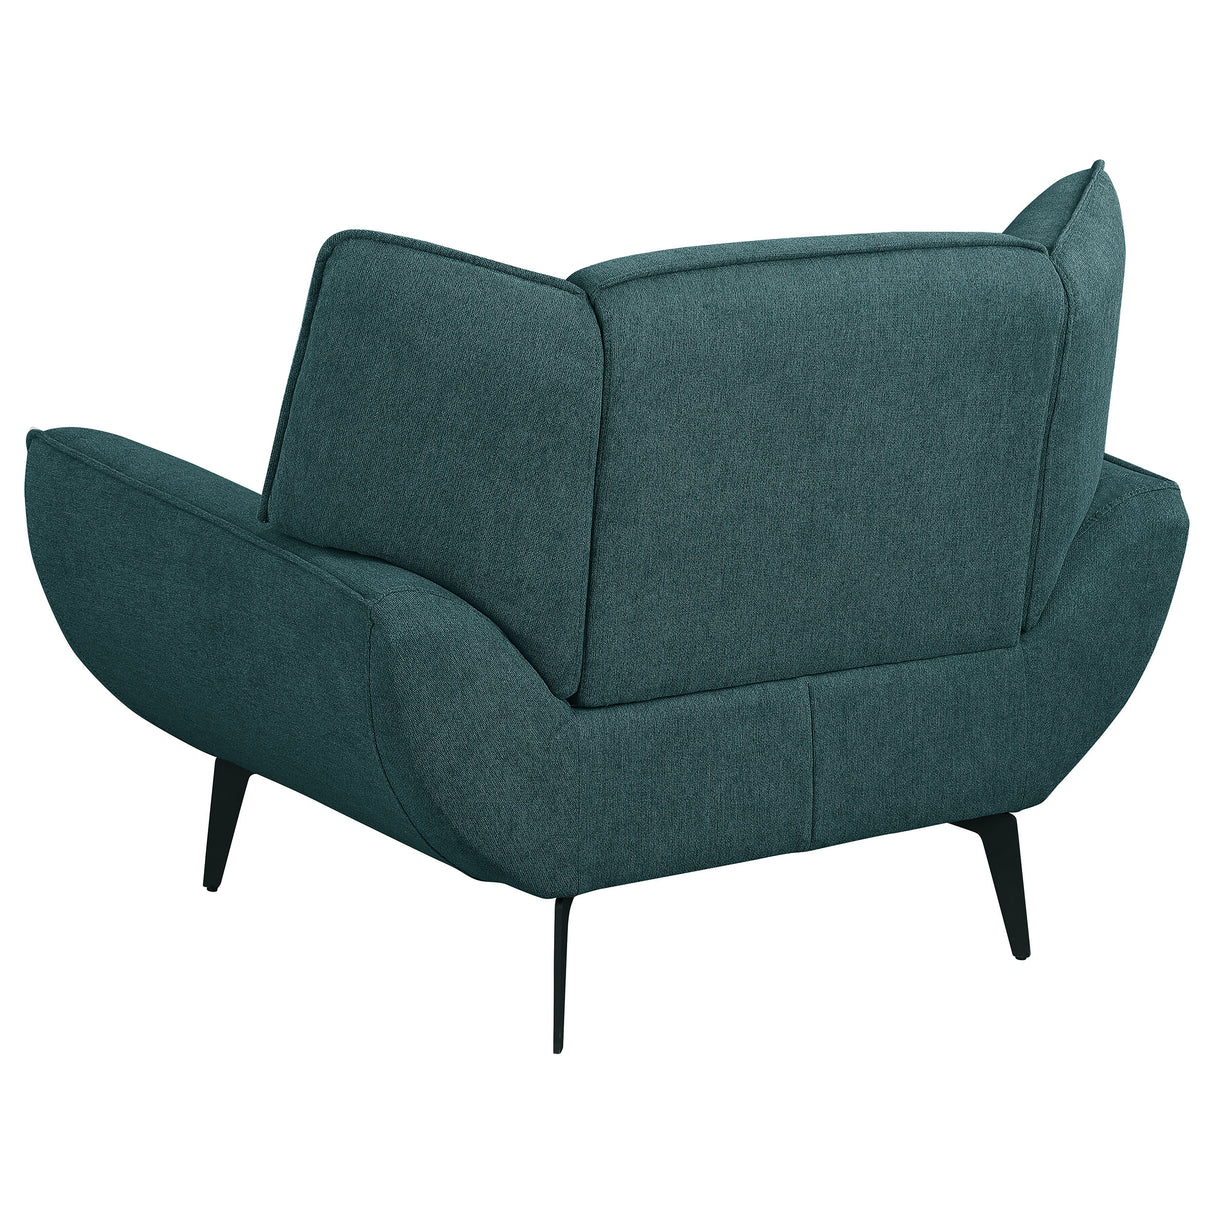 Chair - Acton Upholstered Flared Arm Chair Teal Blue